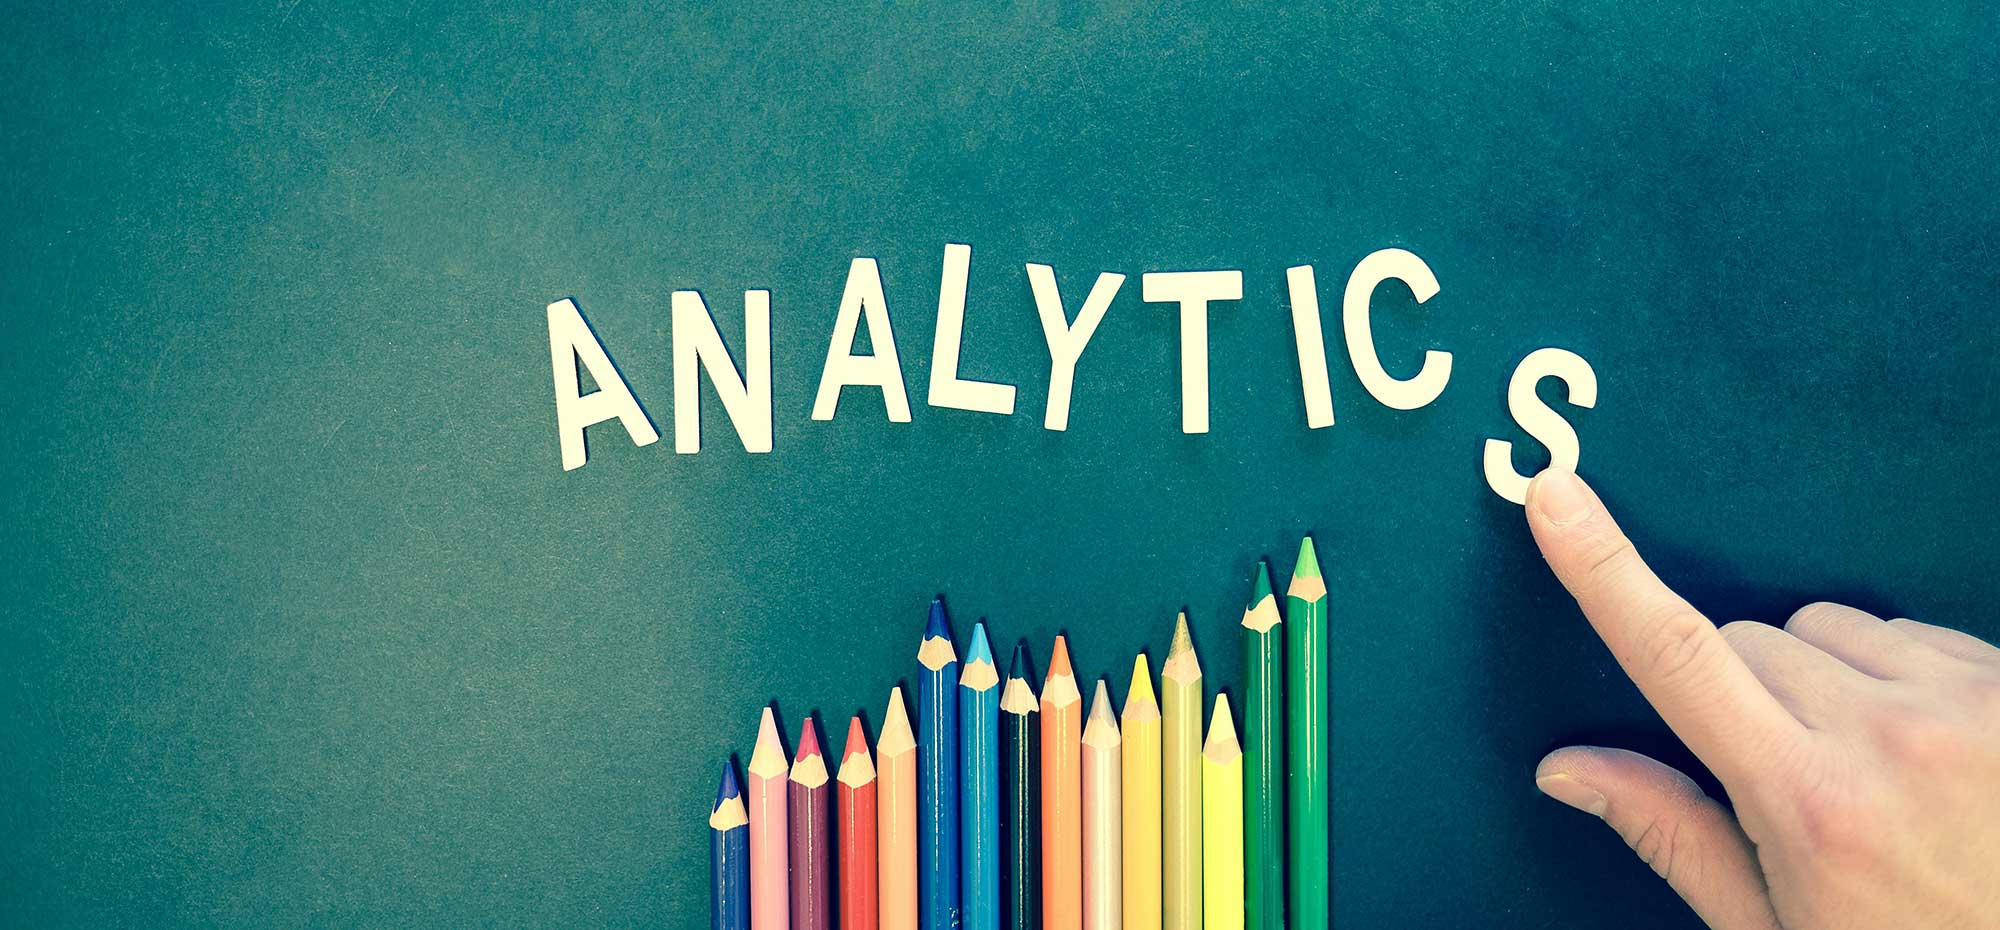 Analytics spelled out with colored pencils below and a hand placing the "S" at the end.